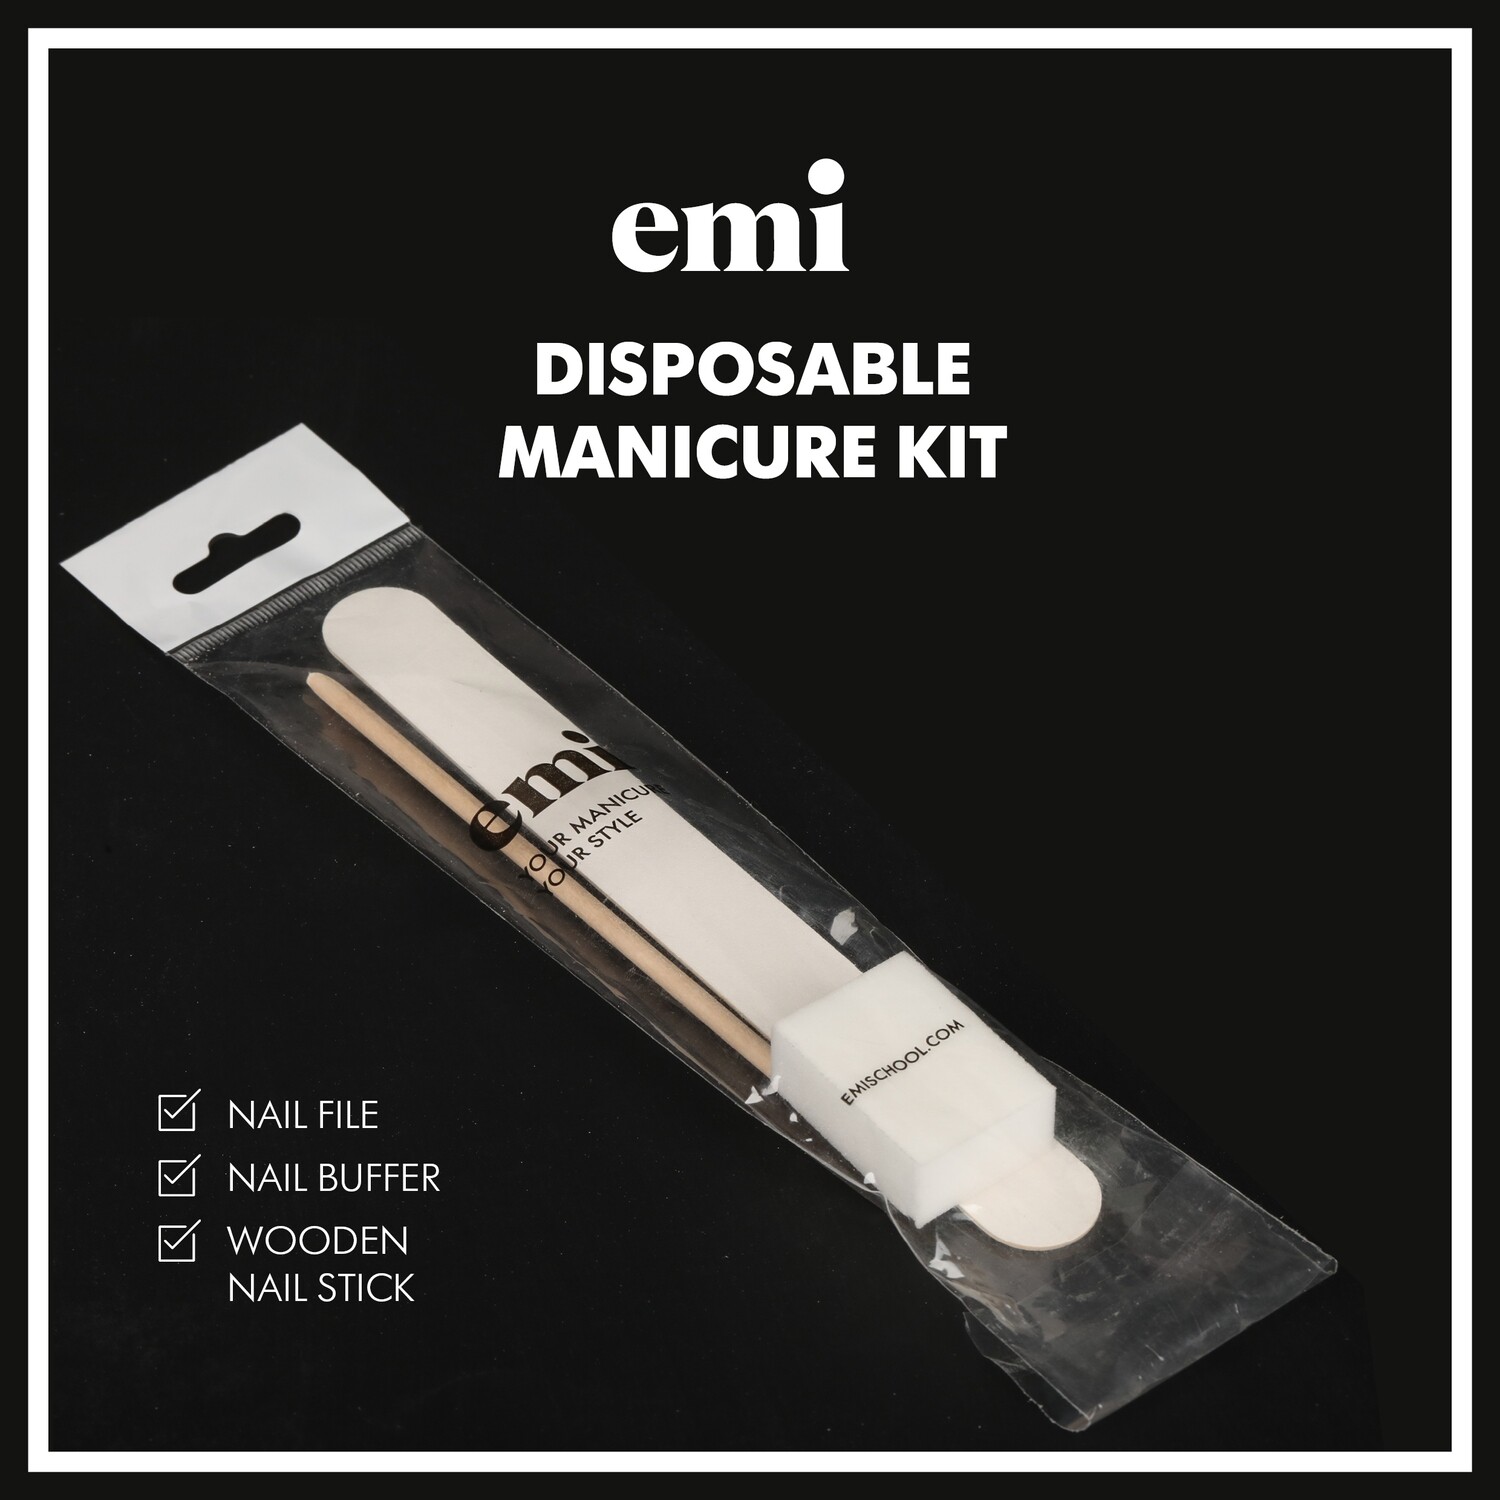 Disposible Manicure Kit